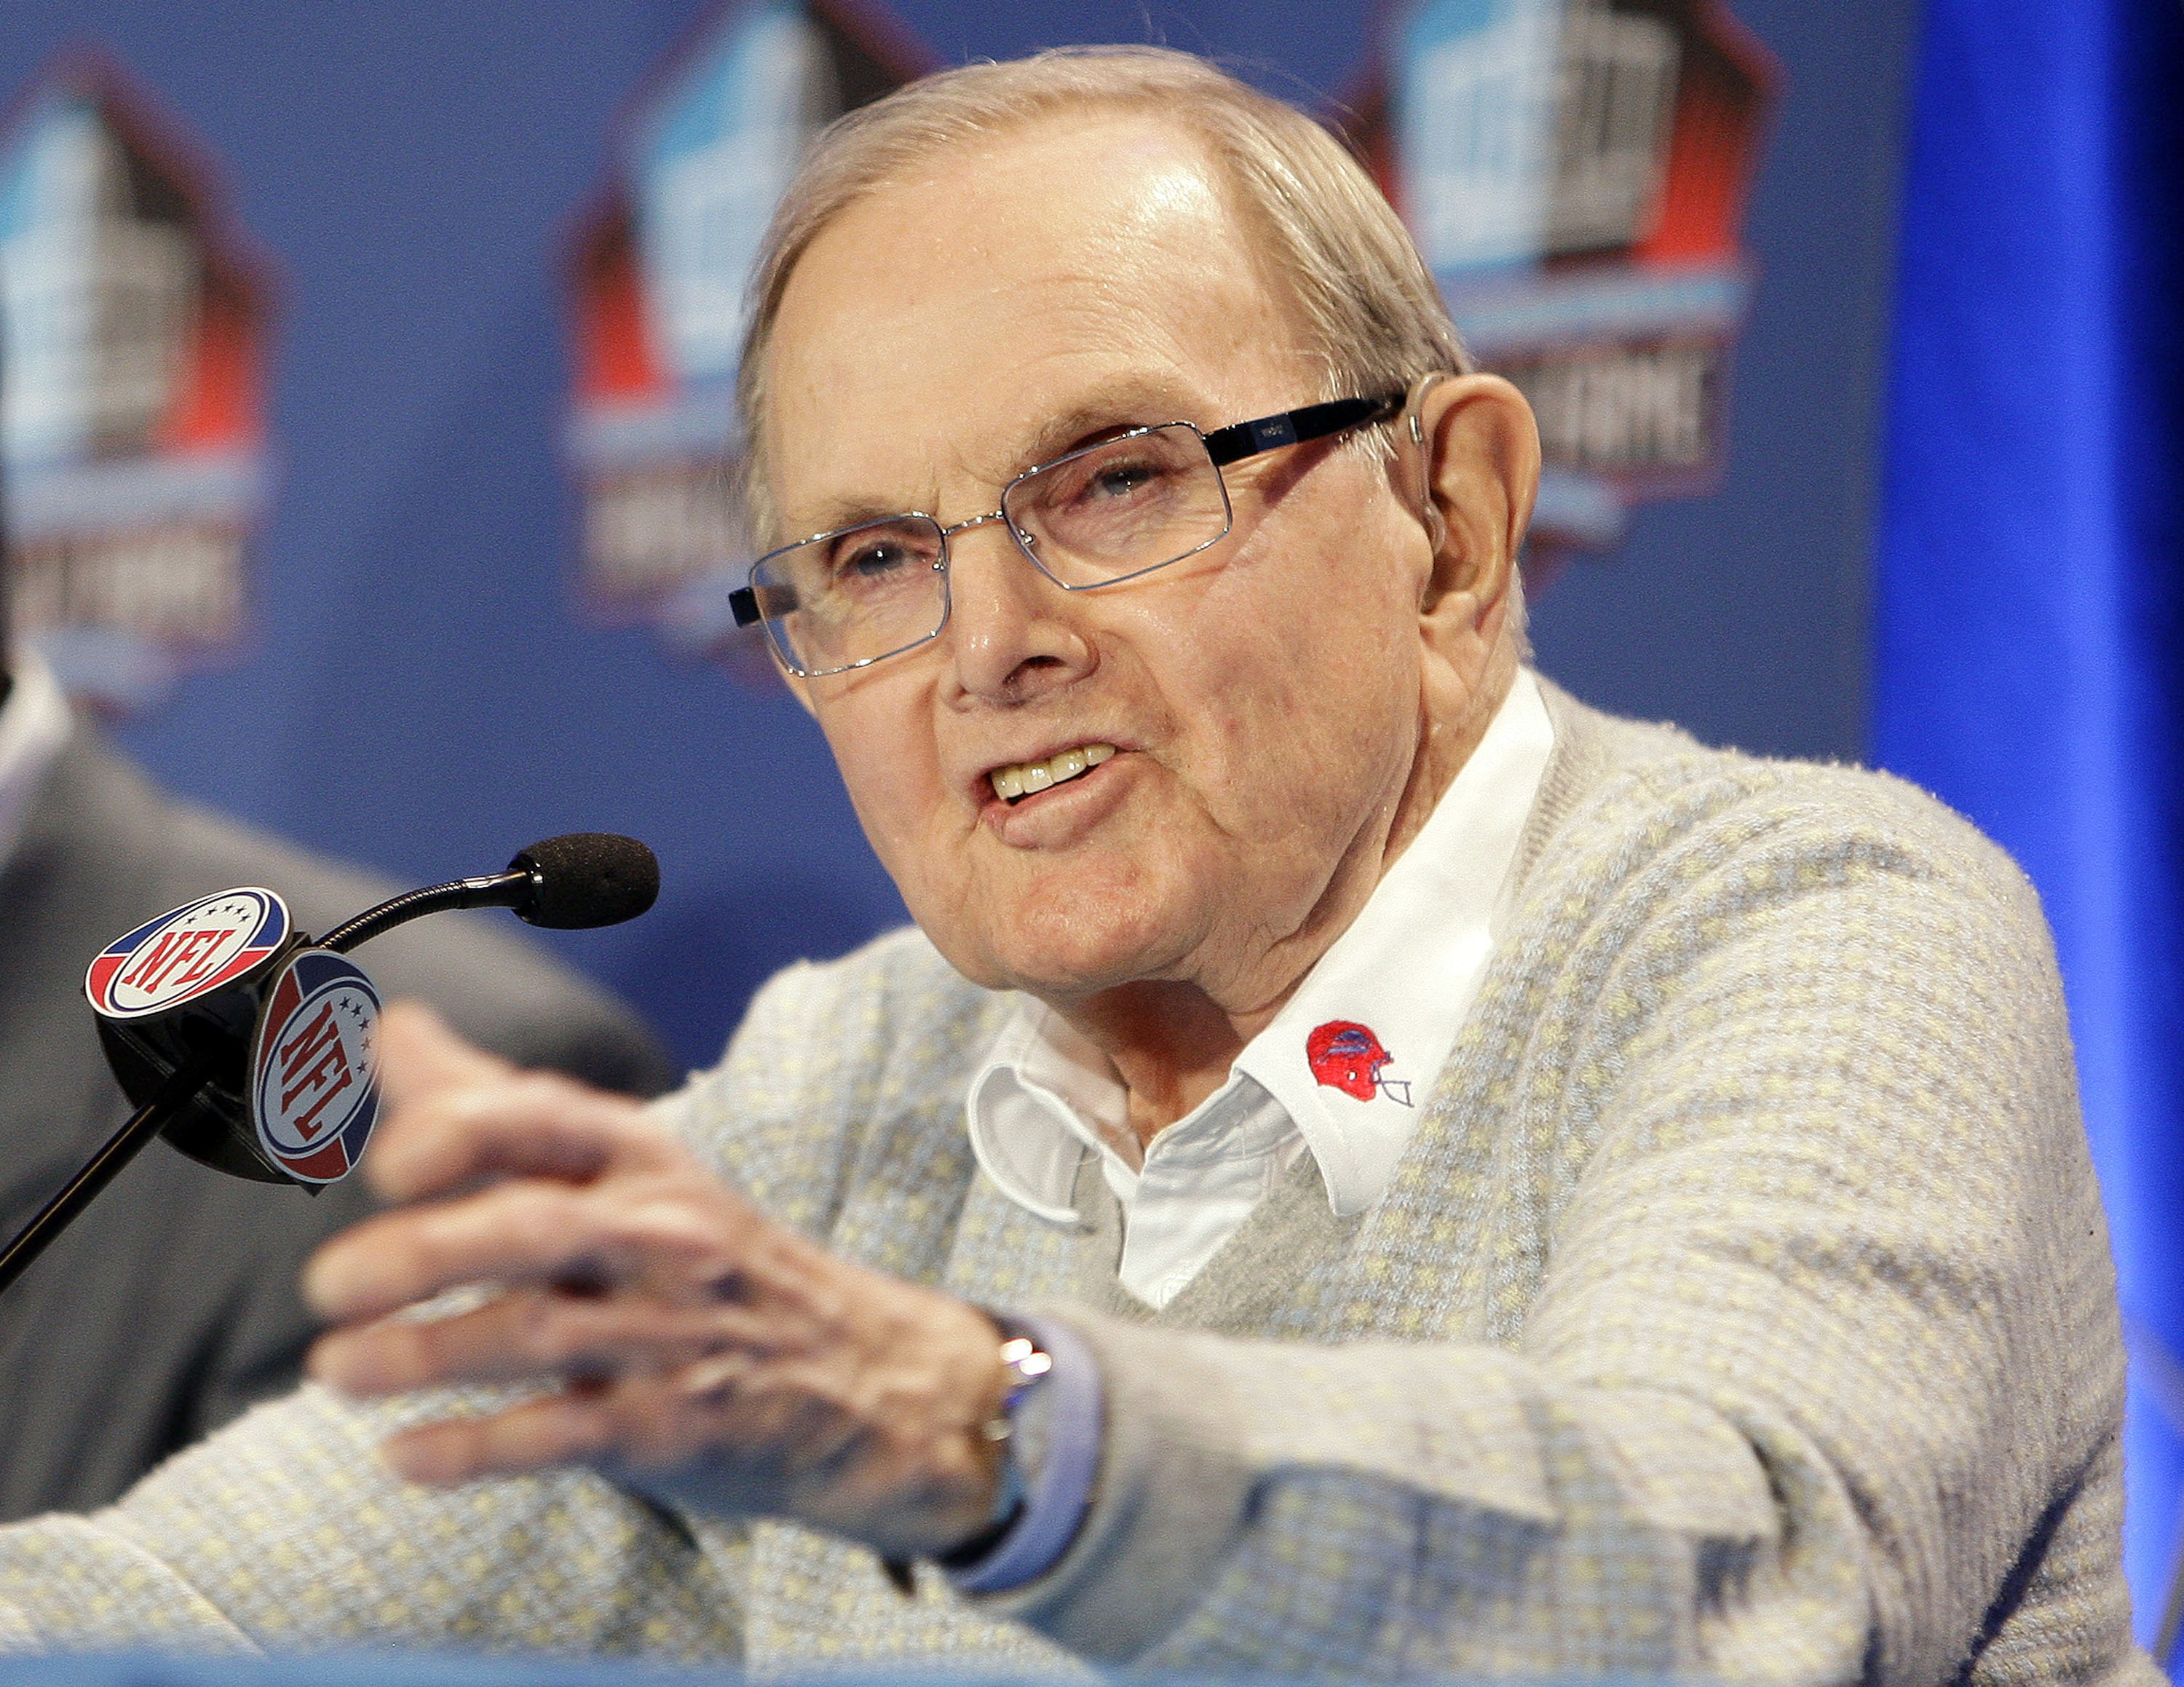 Buffalo Bills owner Ralph Wilson gestures during a news conference in Tampa, Fla. on Jan. 31, 2009.